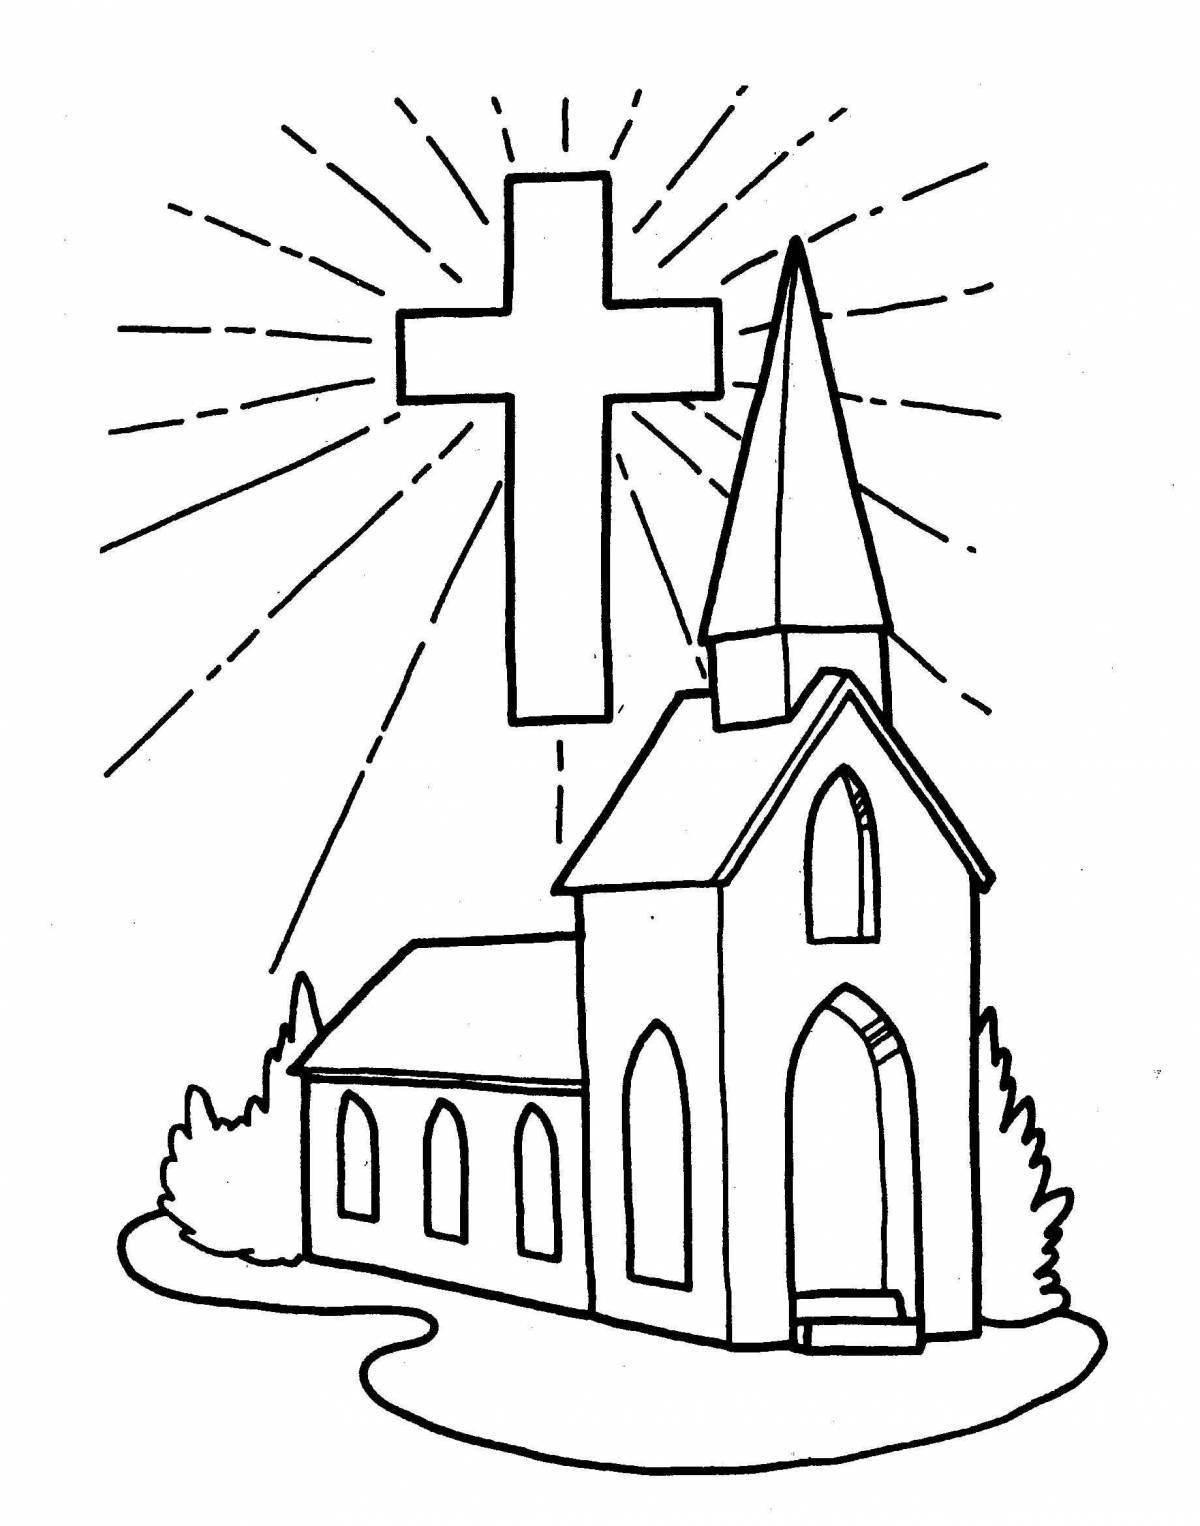 Exquisite church coloring book for kids